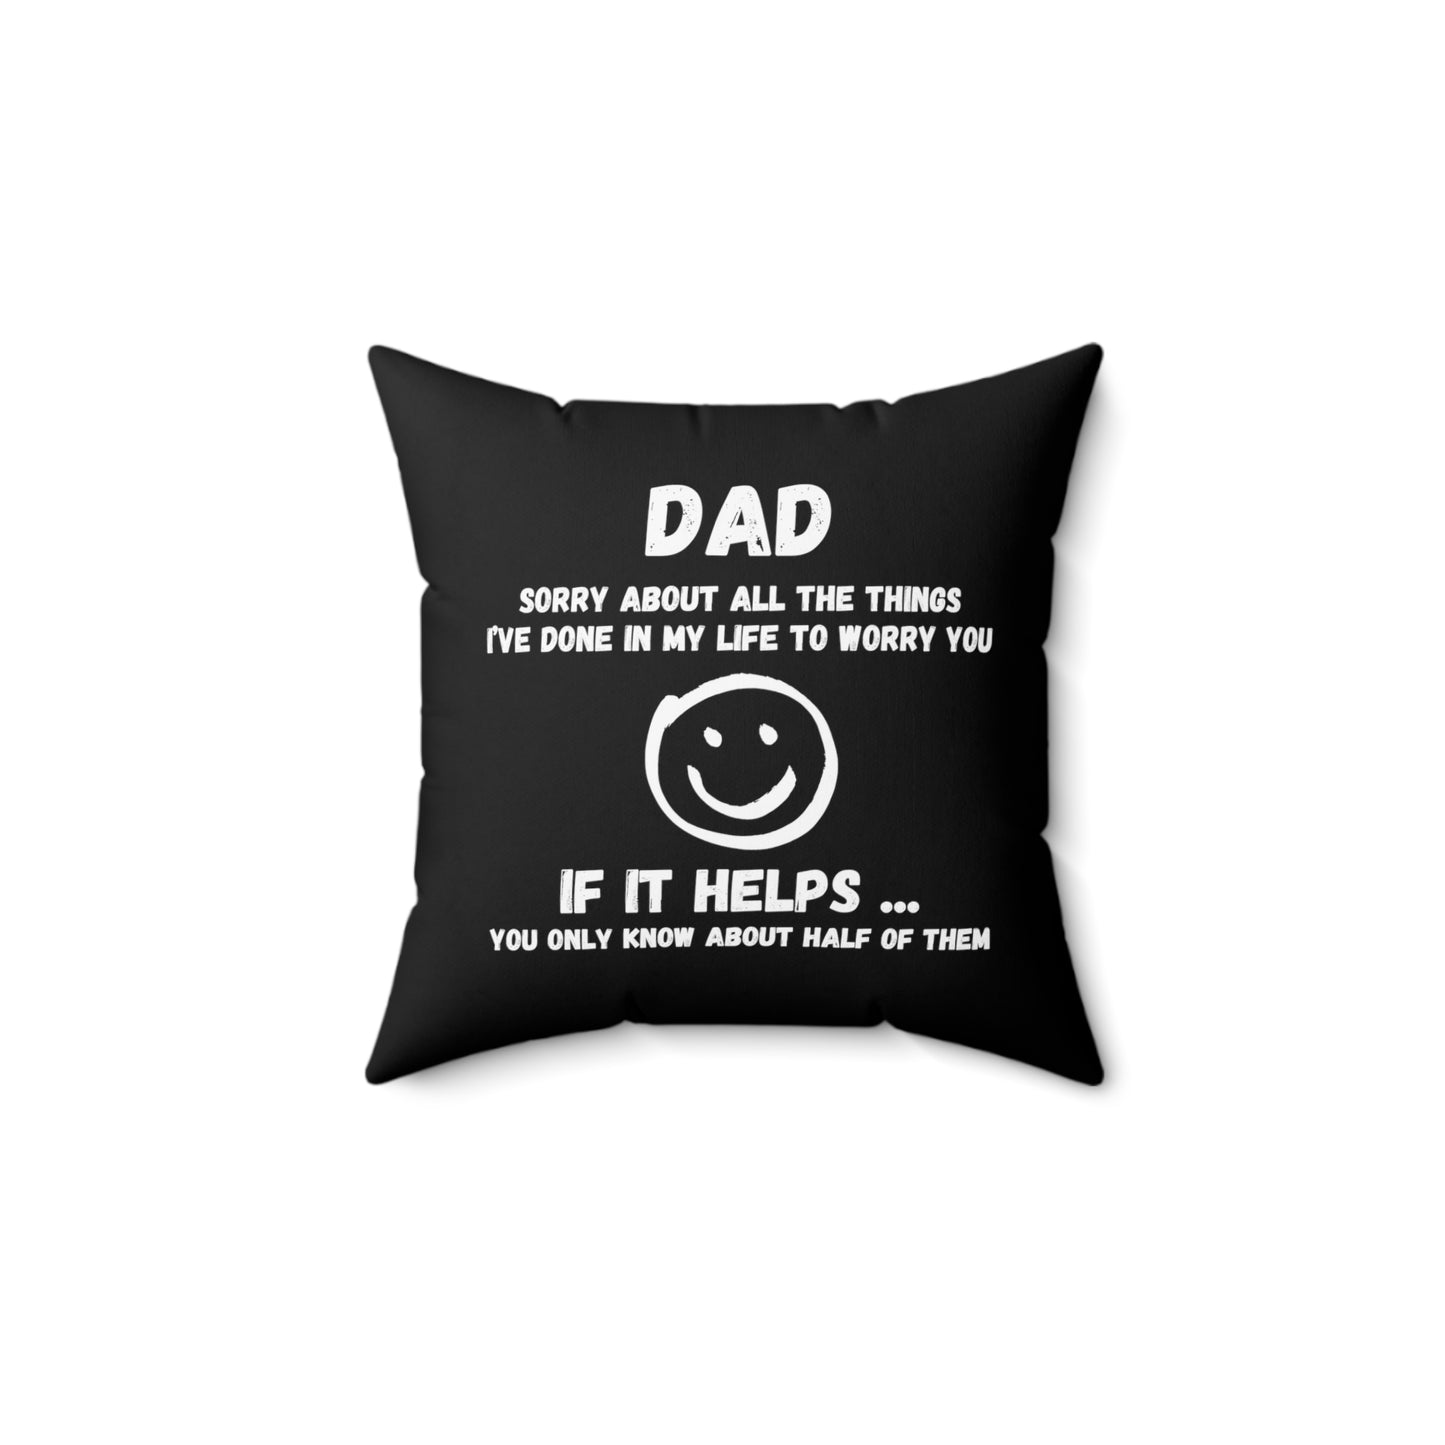 Sentimental pillow gift for dads. This funny dad pillow features a heartfelt and humorous message, making it a unique gift for dad. Black pillow with white design 14" x 14".